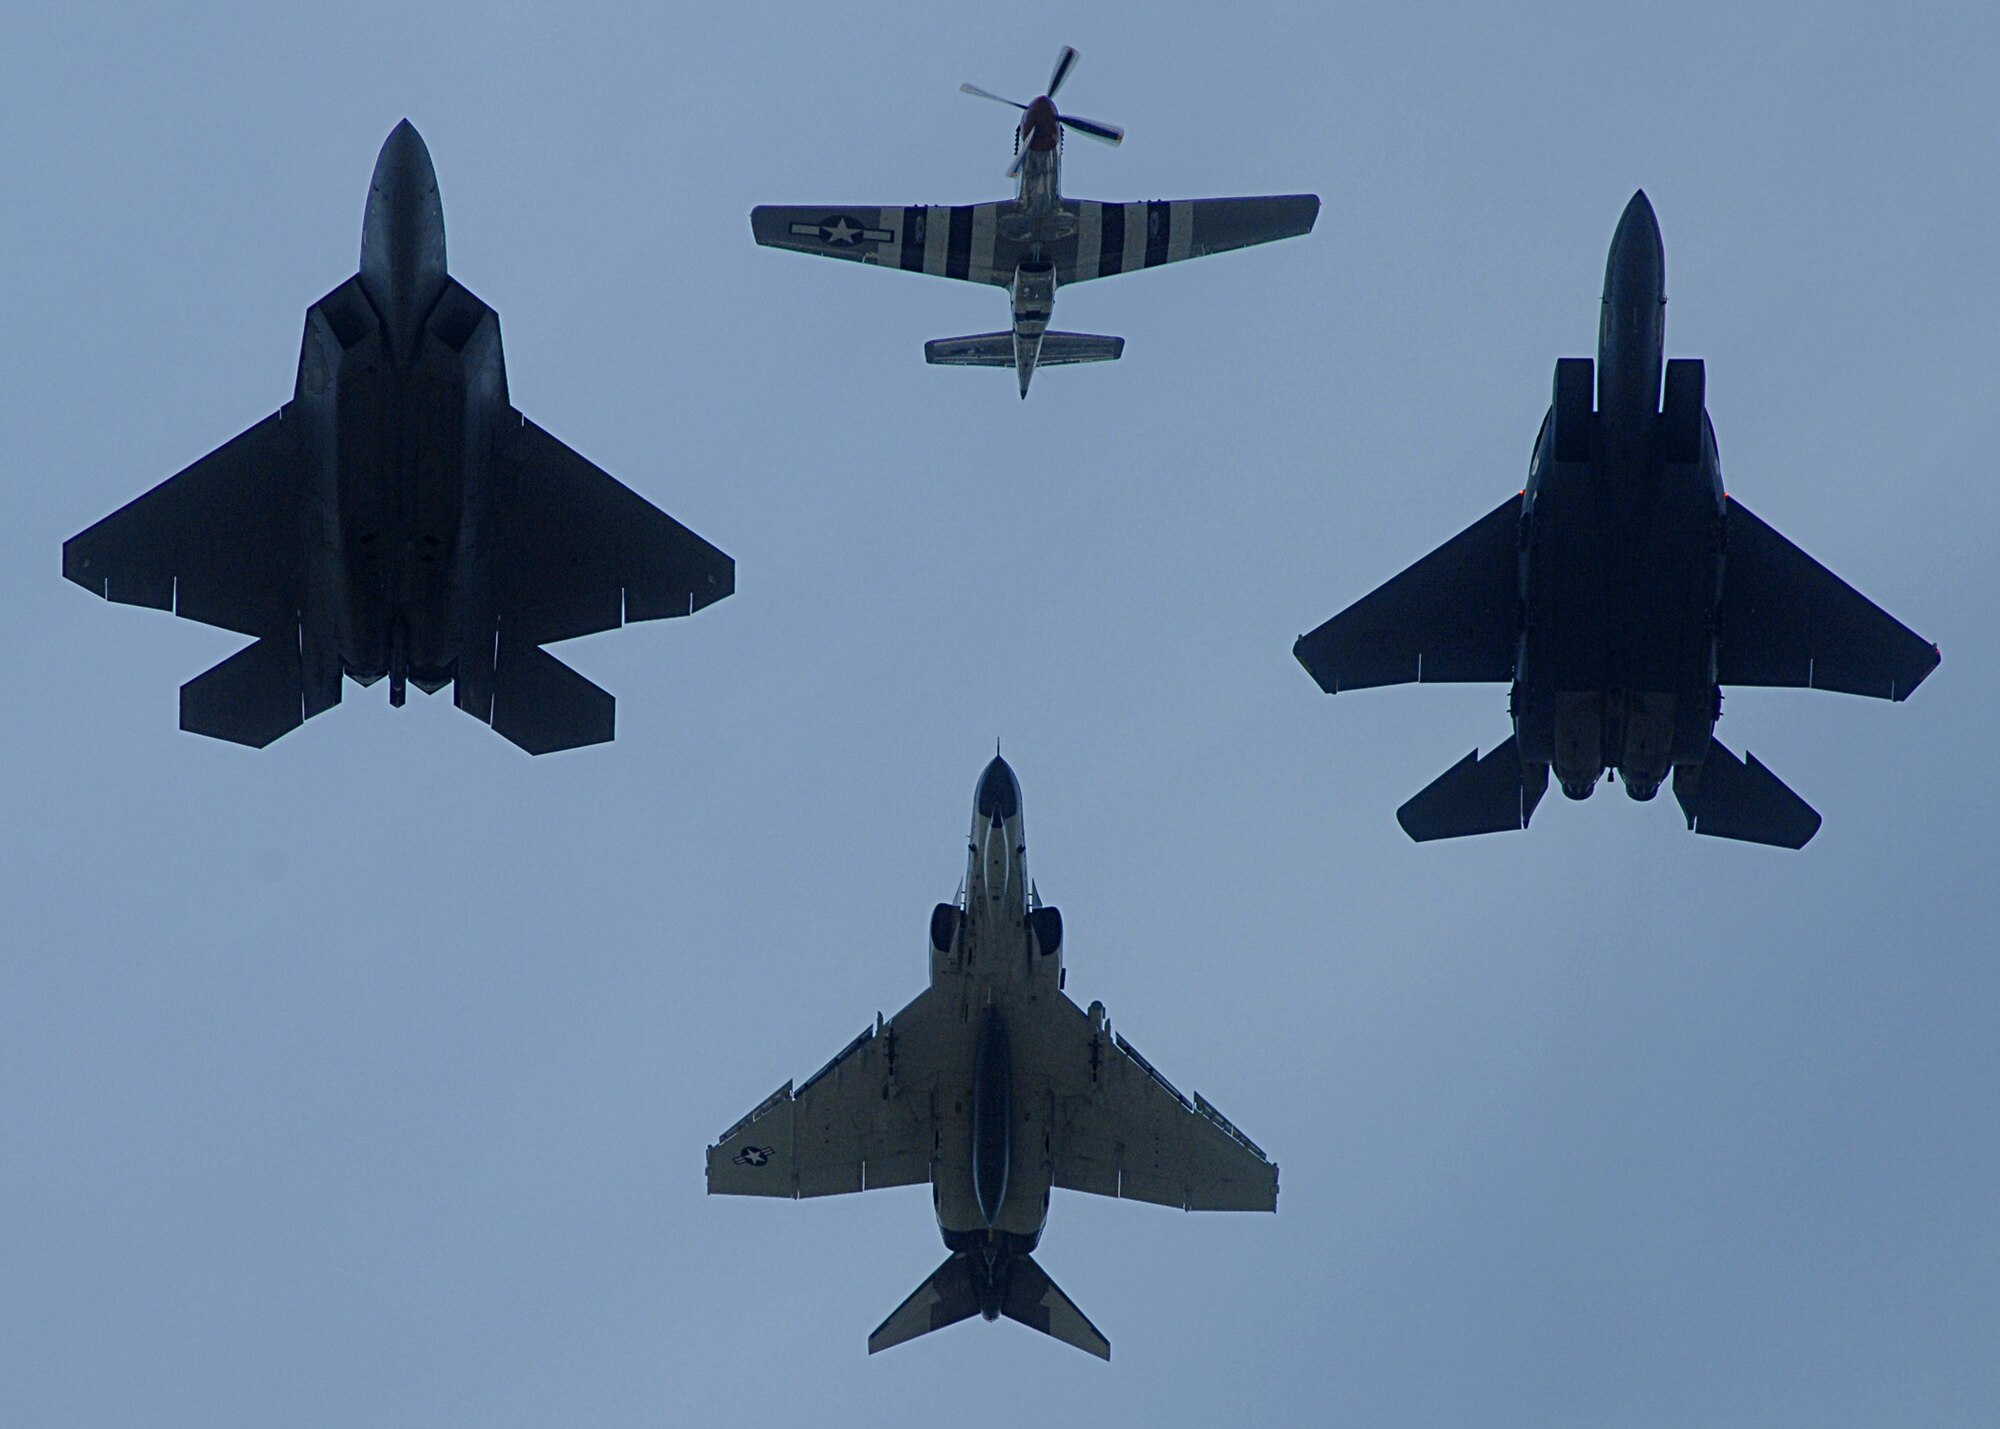 The Air Combat Command Heritage Flight took to the skies over Andrews Air Force Base, Va.,  during the Joint Service Open House May 17.  The Heritage flight consists of a P-51 Mustang (lead), a F-22A Raptor (left), a F-15E Strike Eagle (right) and an F-4 Phantom.  The F-4s used in the Heritage flights are owned and operated by the 82nd Aerial Targets Squadron from Tyndall Air Force Base, Fla.  Photo by Amn Melissa Rodrigues.